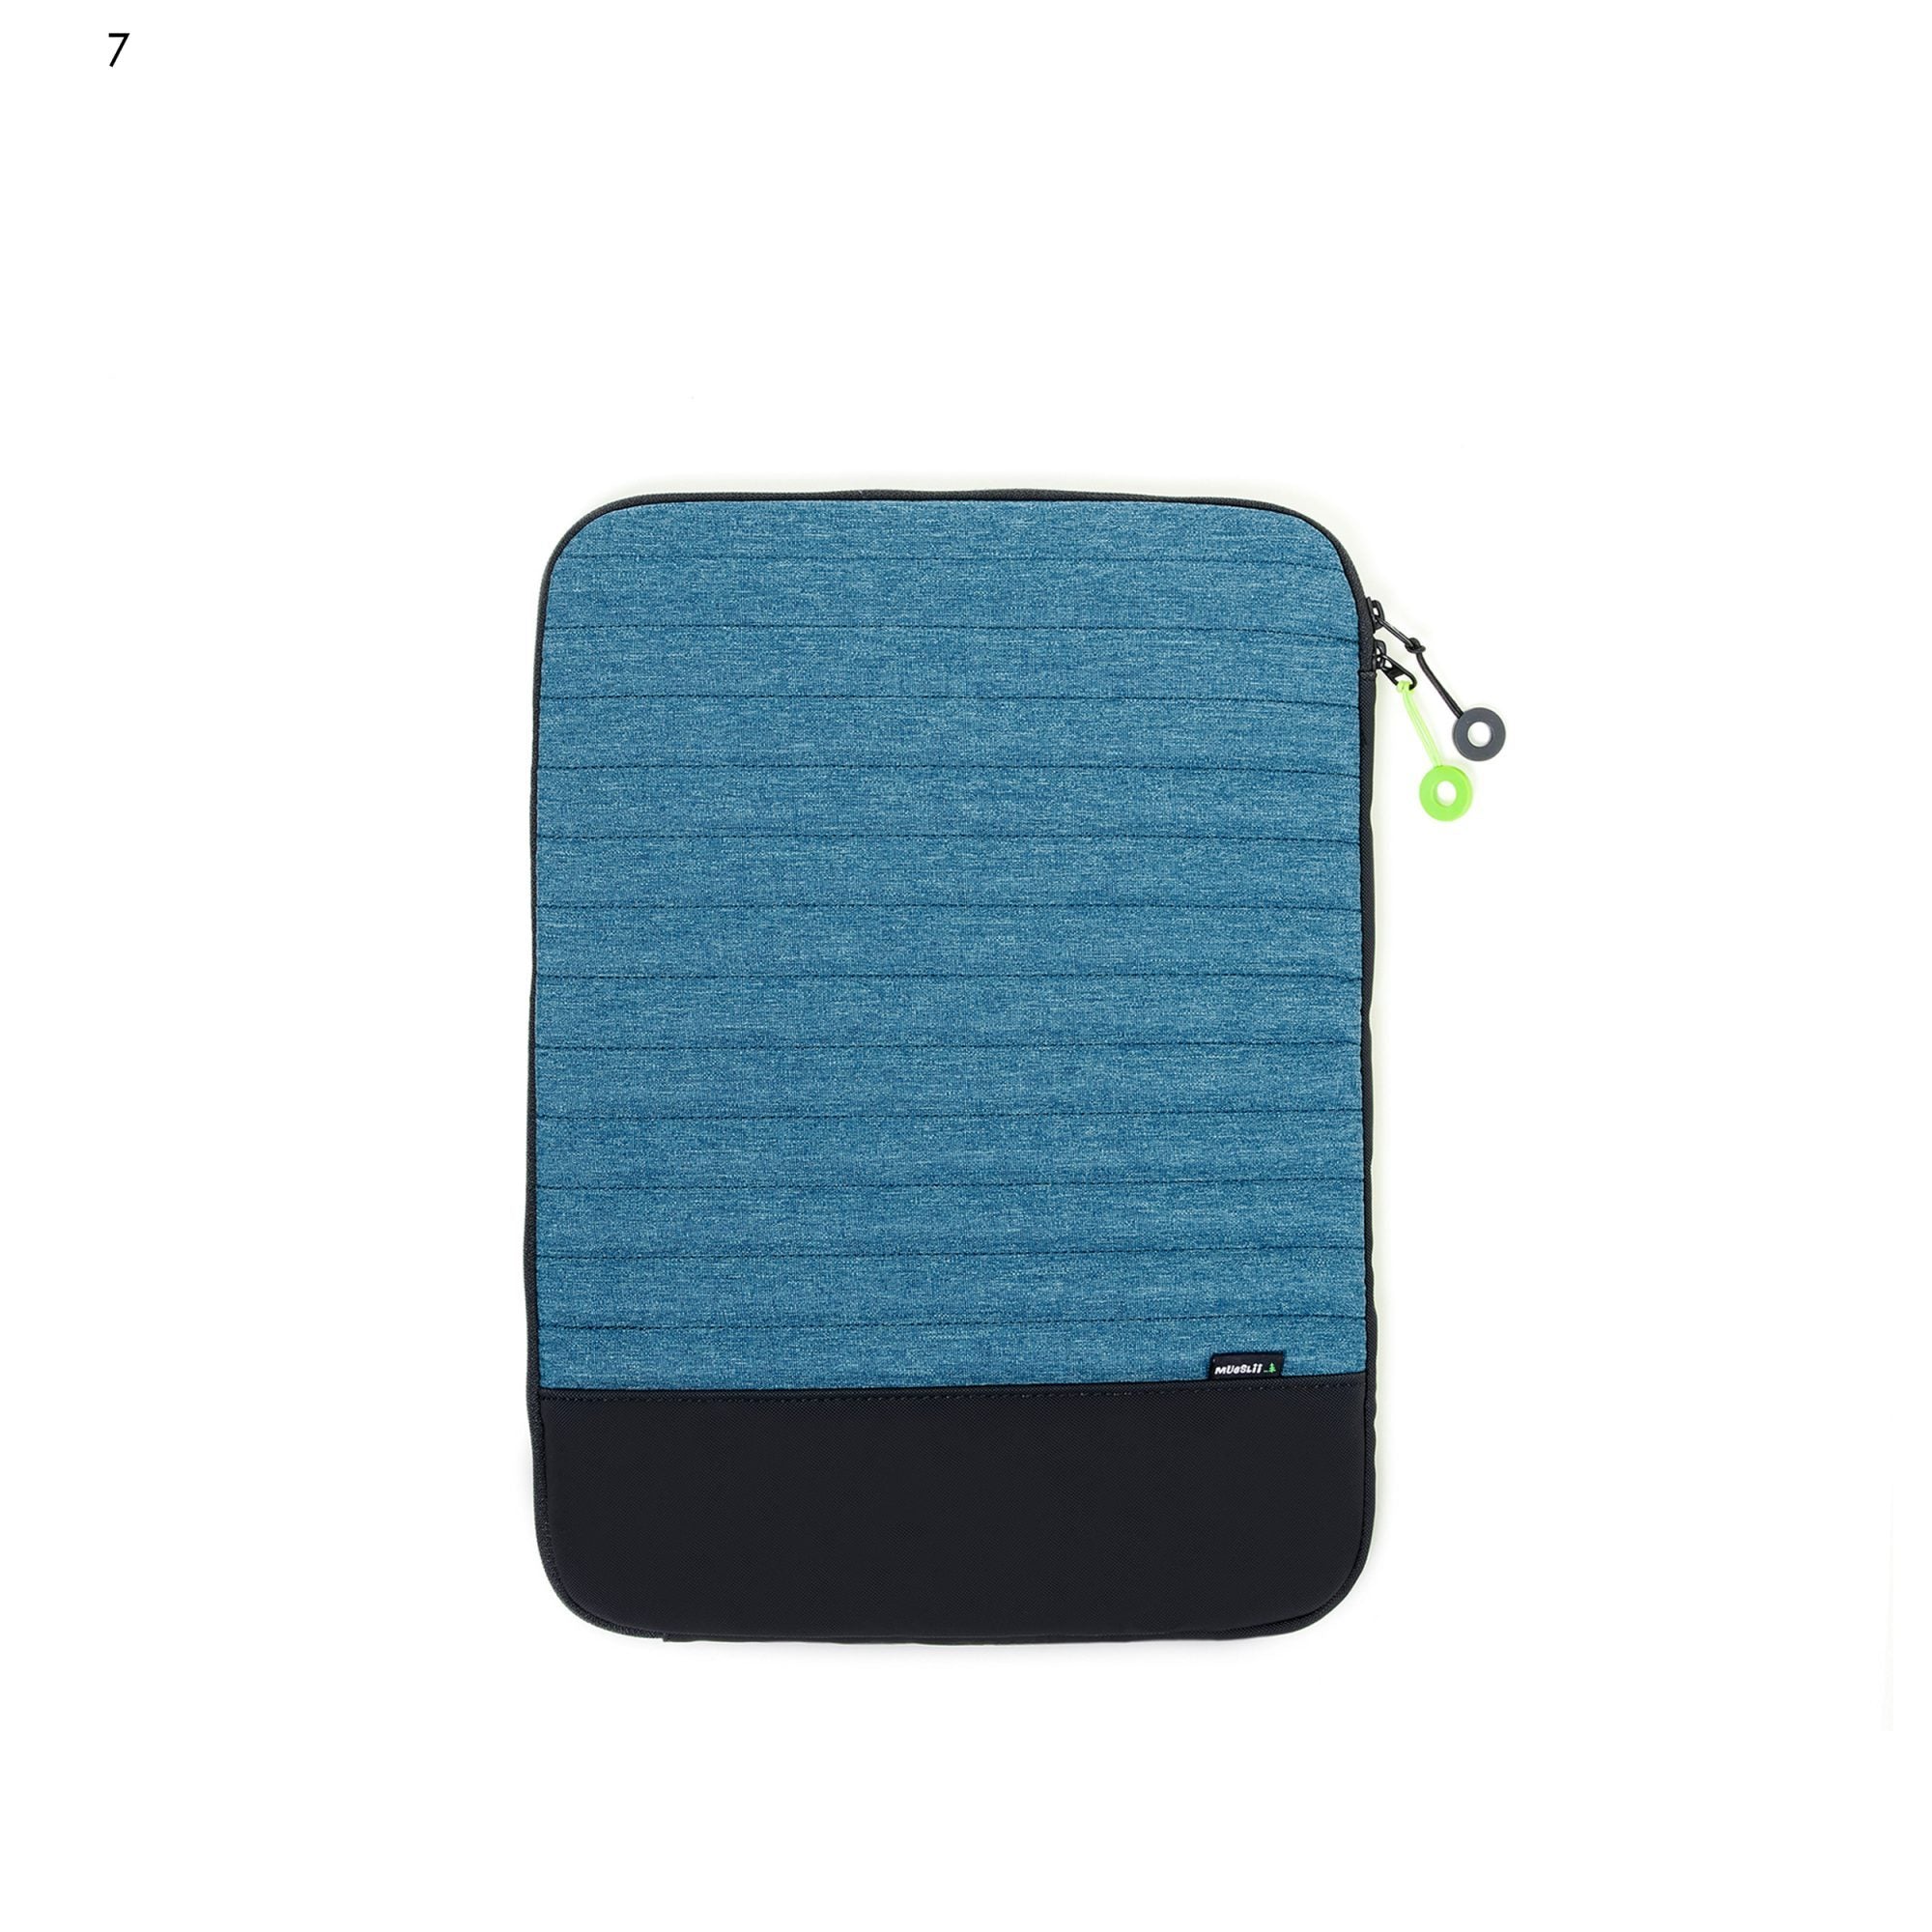 Mueslii 16" padded laptop sleeves made of rip stop nylon and Ykk zips, color casual blue.